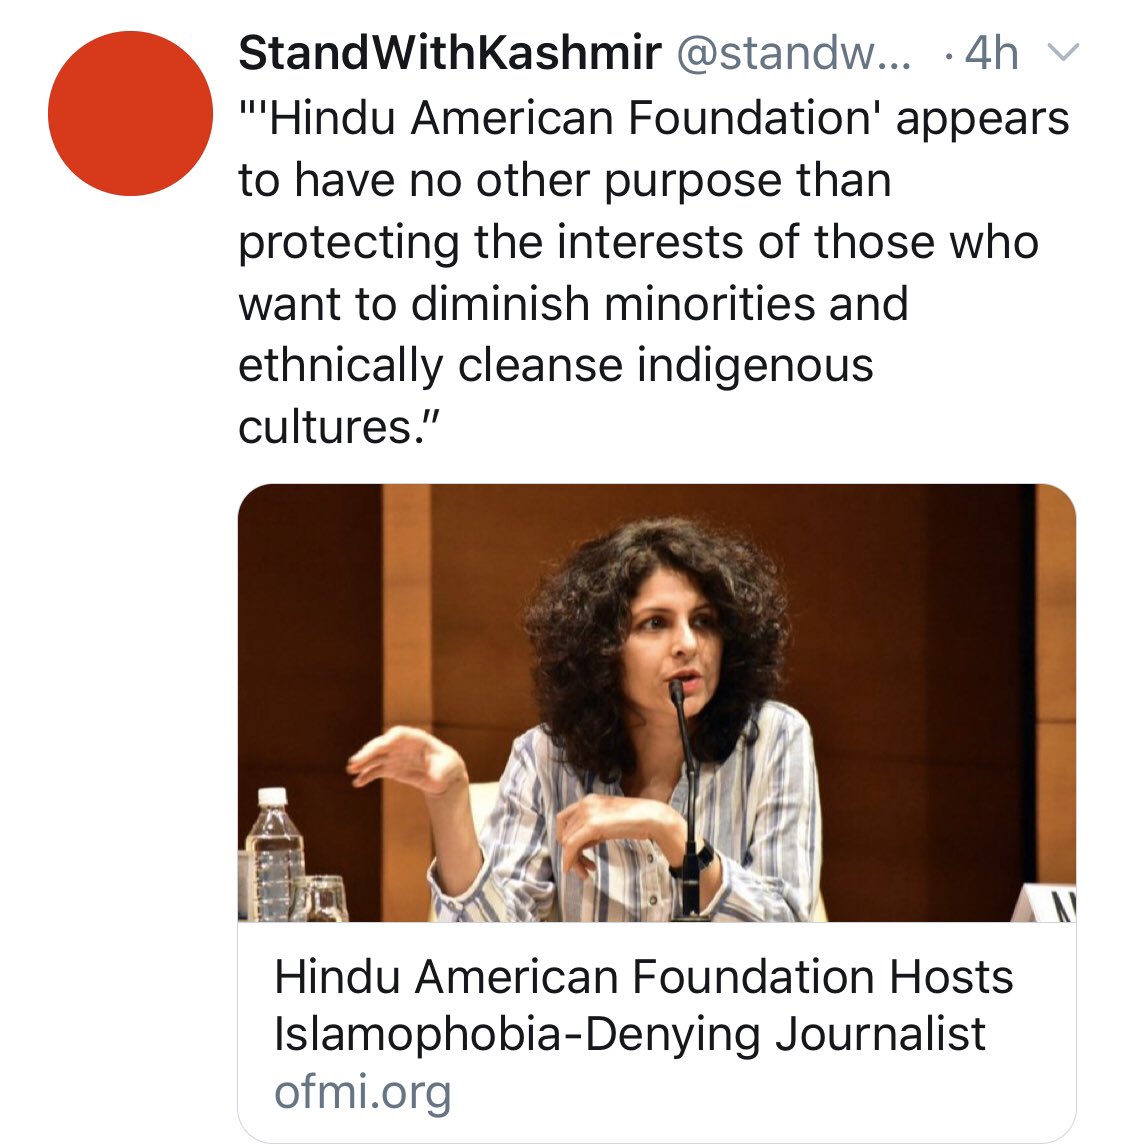 Symmetry: a handle that promotes Kashmir “azadi” (secession from India) retweets and promotes Khalistani group, OFMI (promotes secession of Punjab). This is how the azadi ecosystem works. #Istandwithkashmir